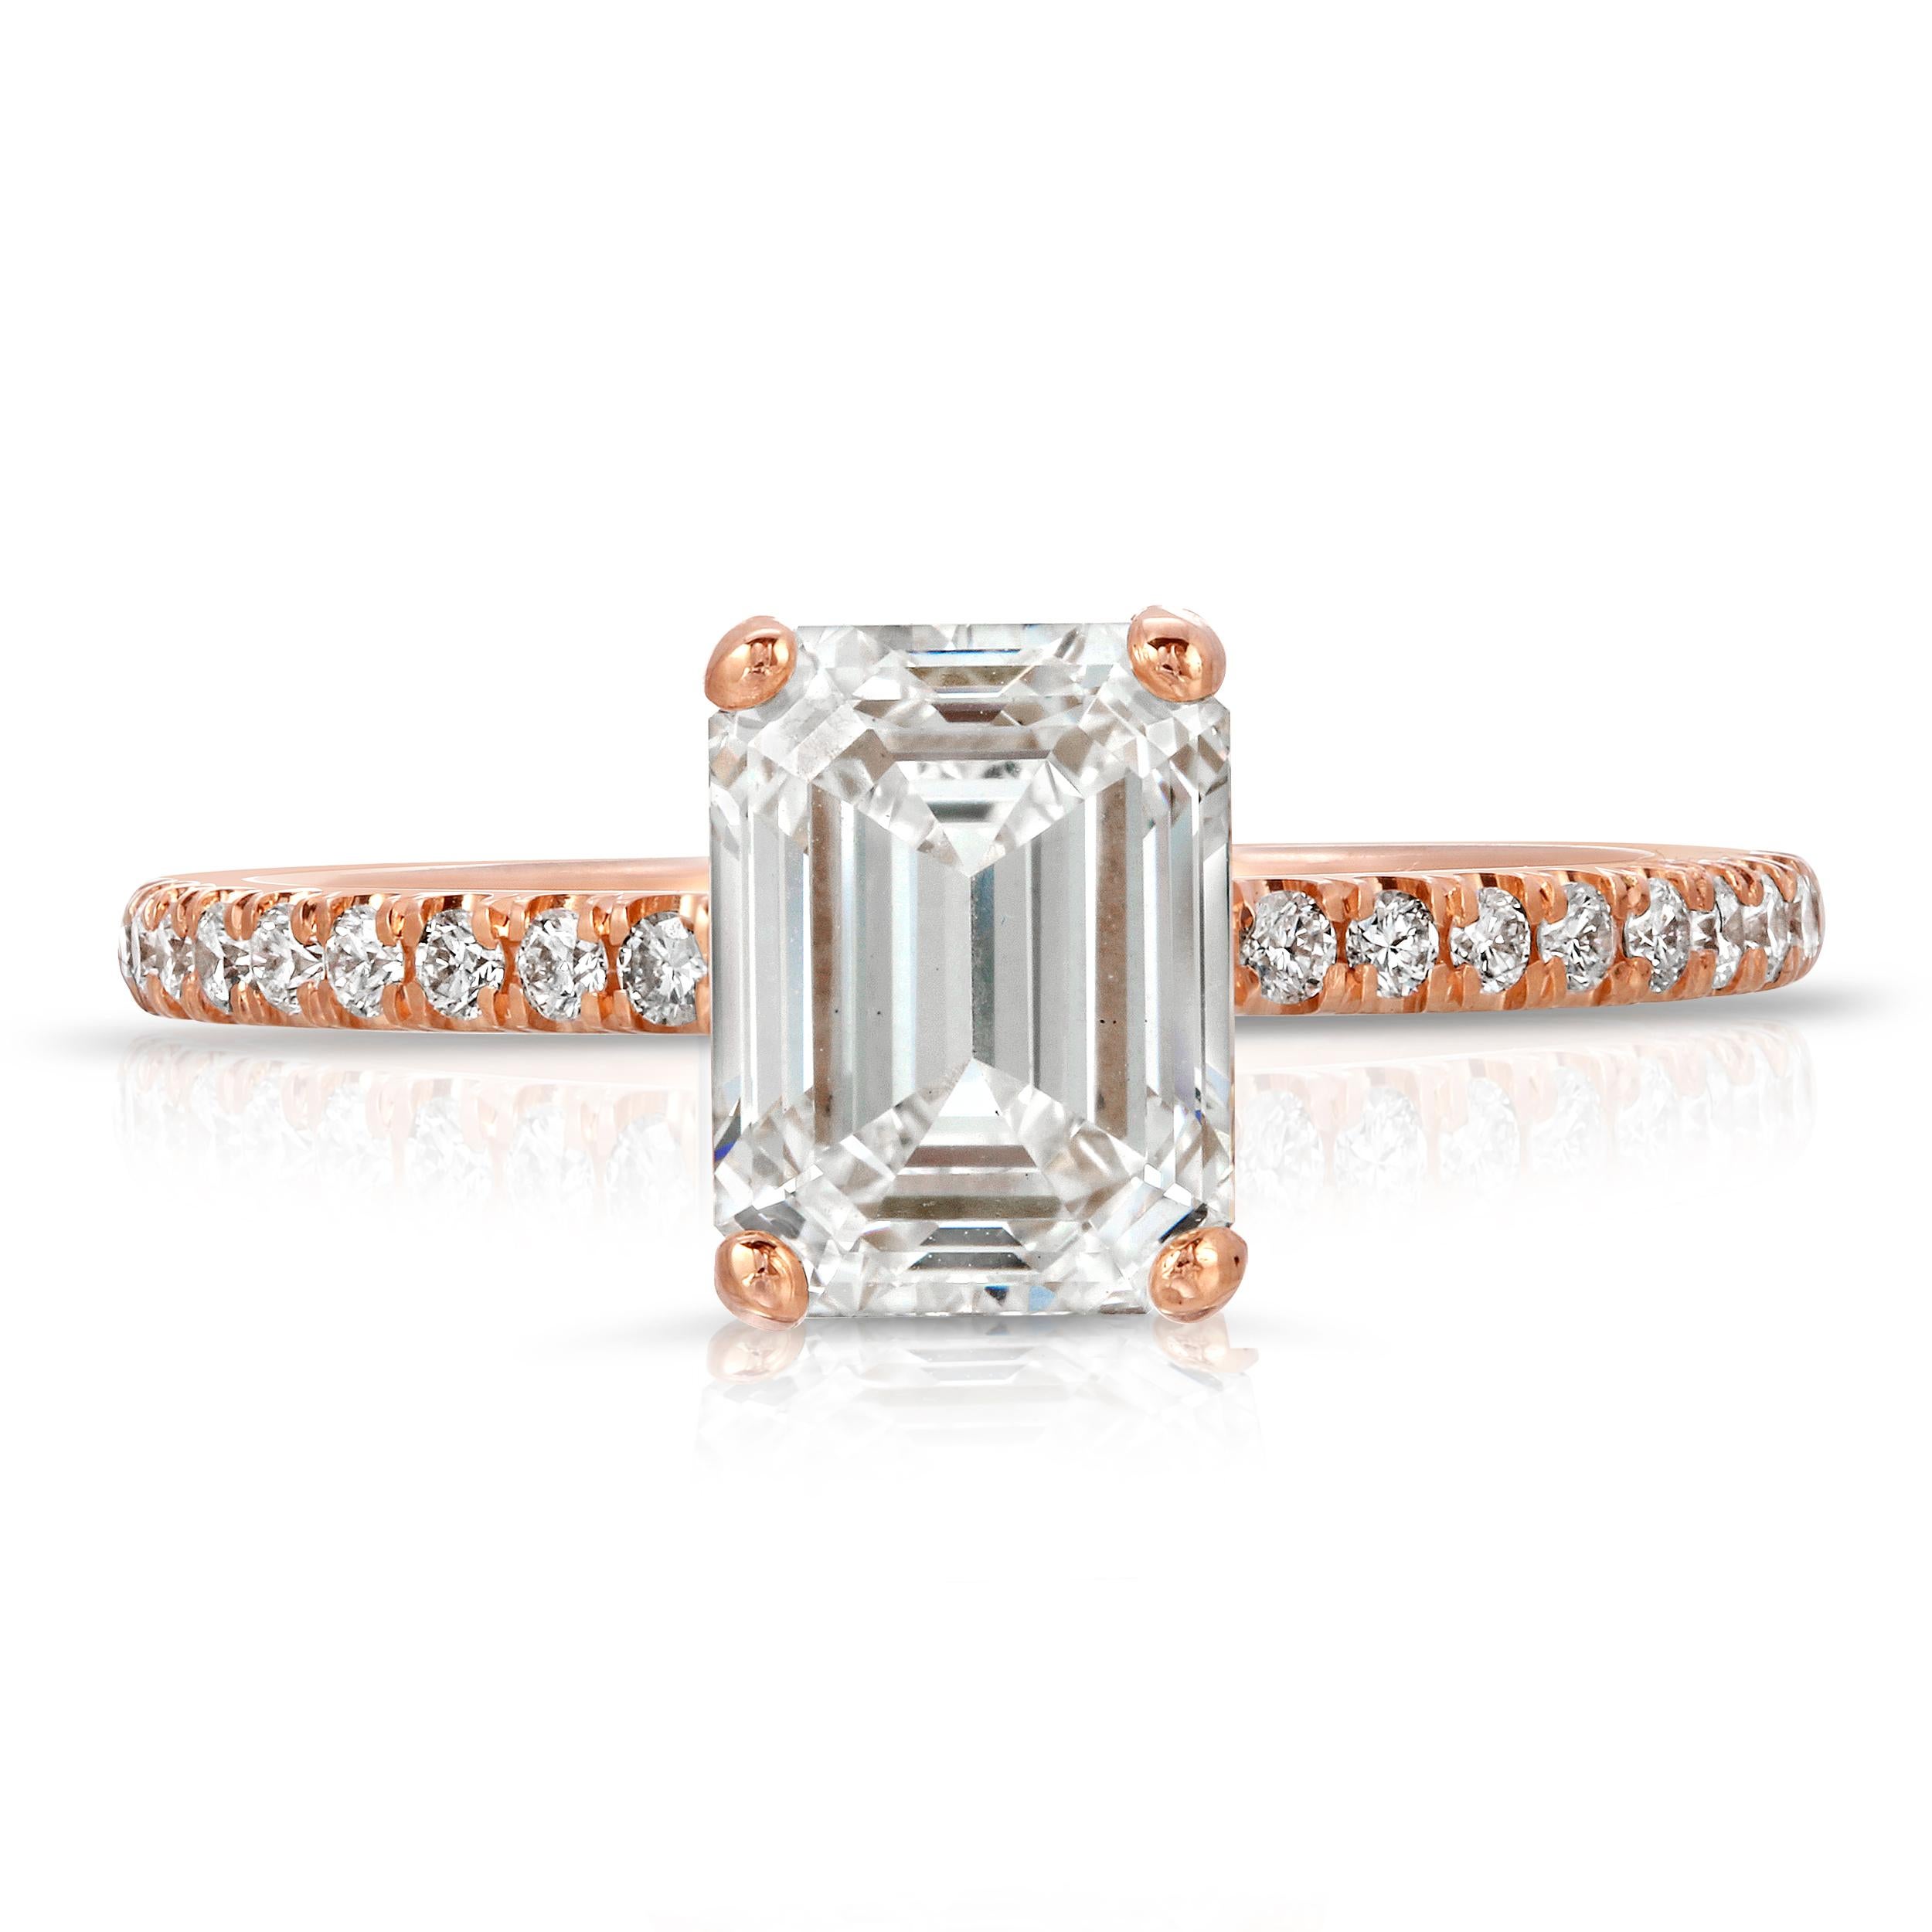 This vintage inspired engagement ring will give you a one-of-a-kind piece of jewelry. The under gallery of this dazzling ring is designed to makes the center diamond stand out. A sparkly center diamond is accented by a hidden halo and pave setting